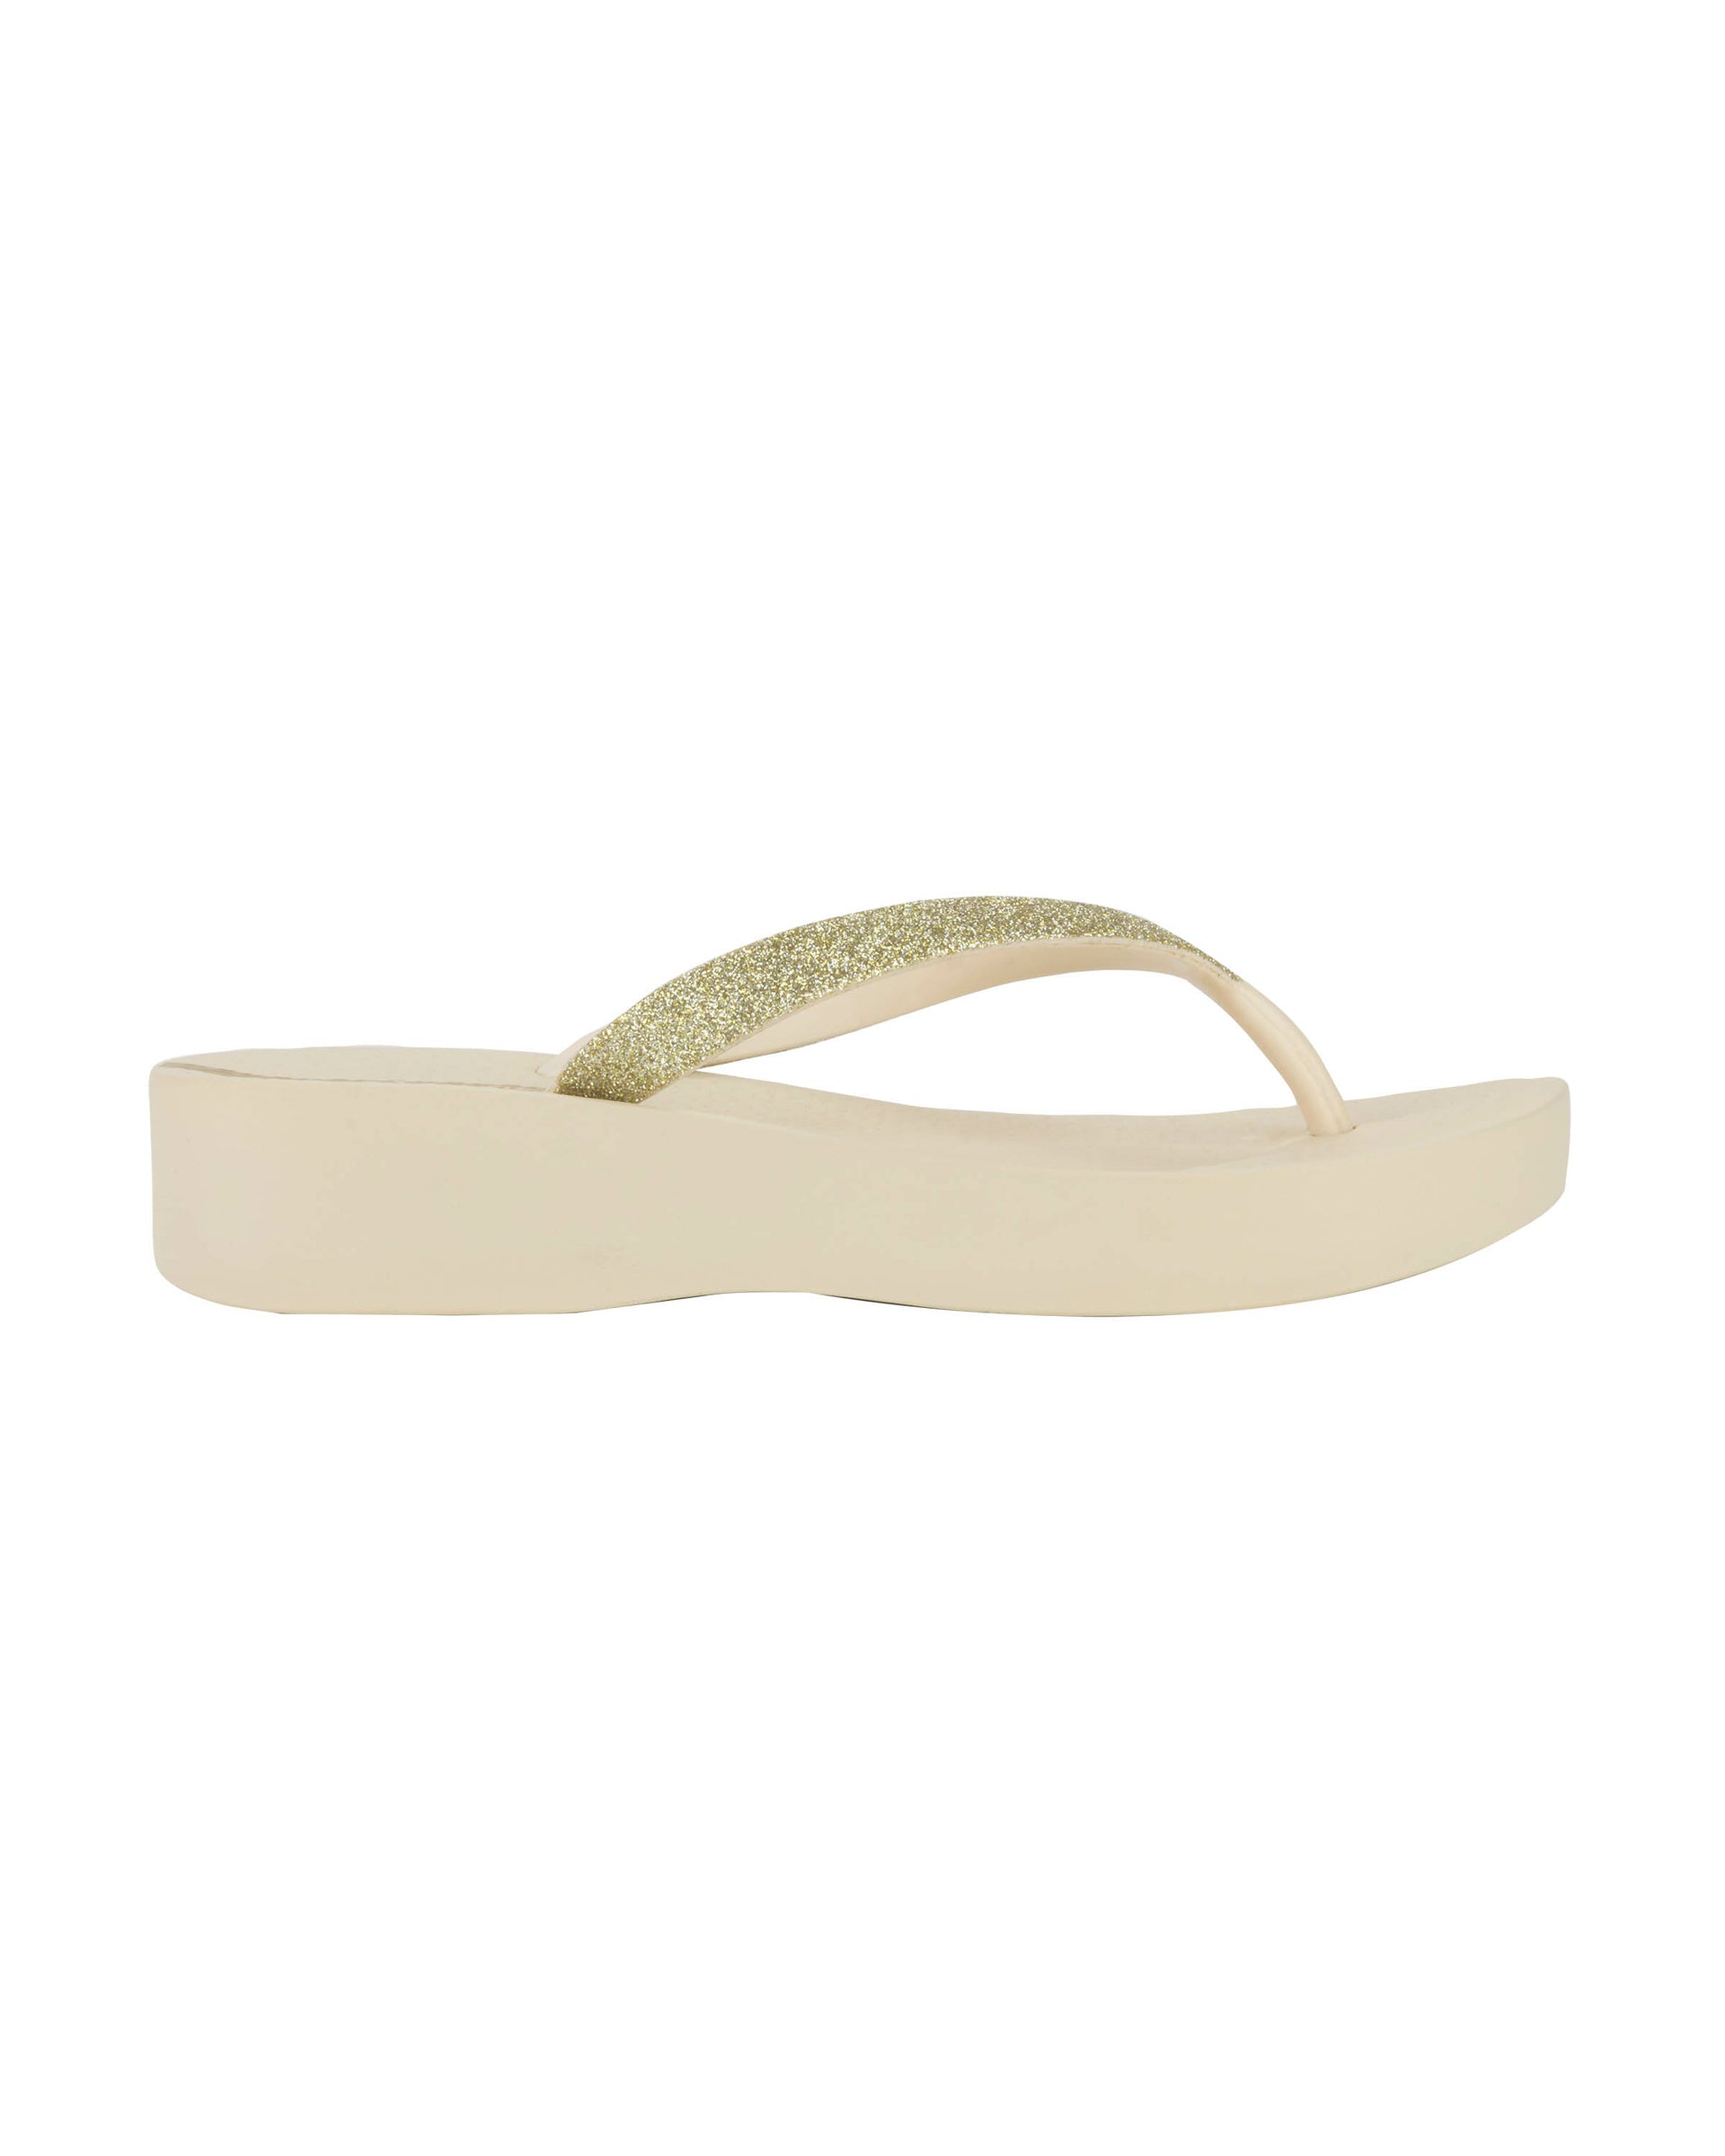 Outer side view of a beige Ipanema Mesh Chic women's wedge flip flop with glitter gold straps.